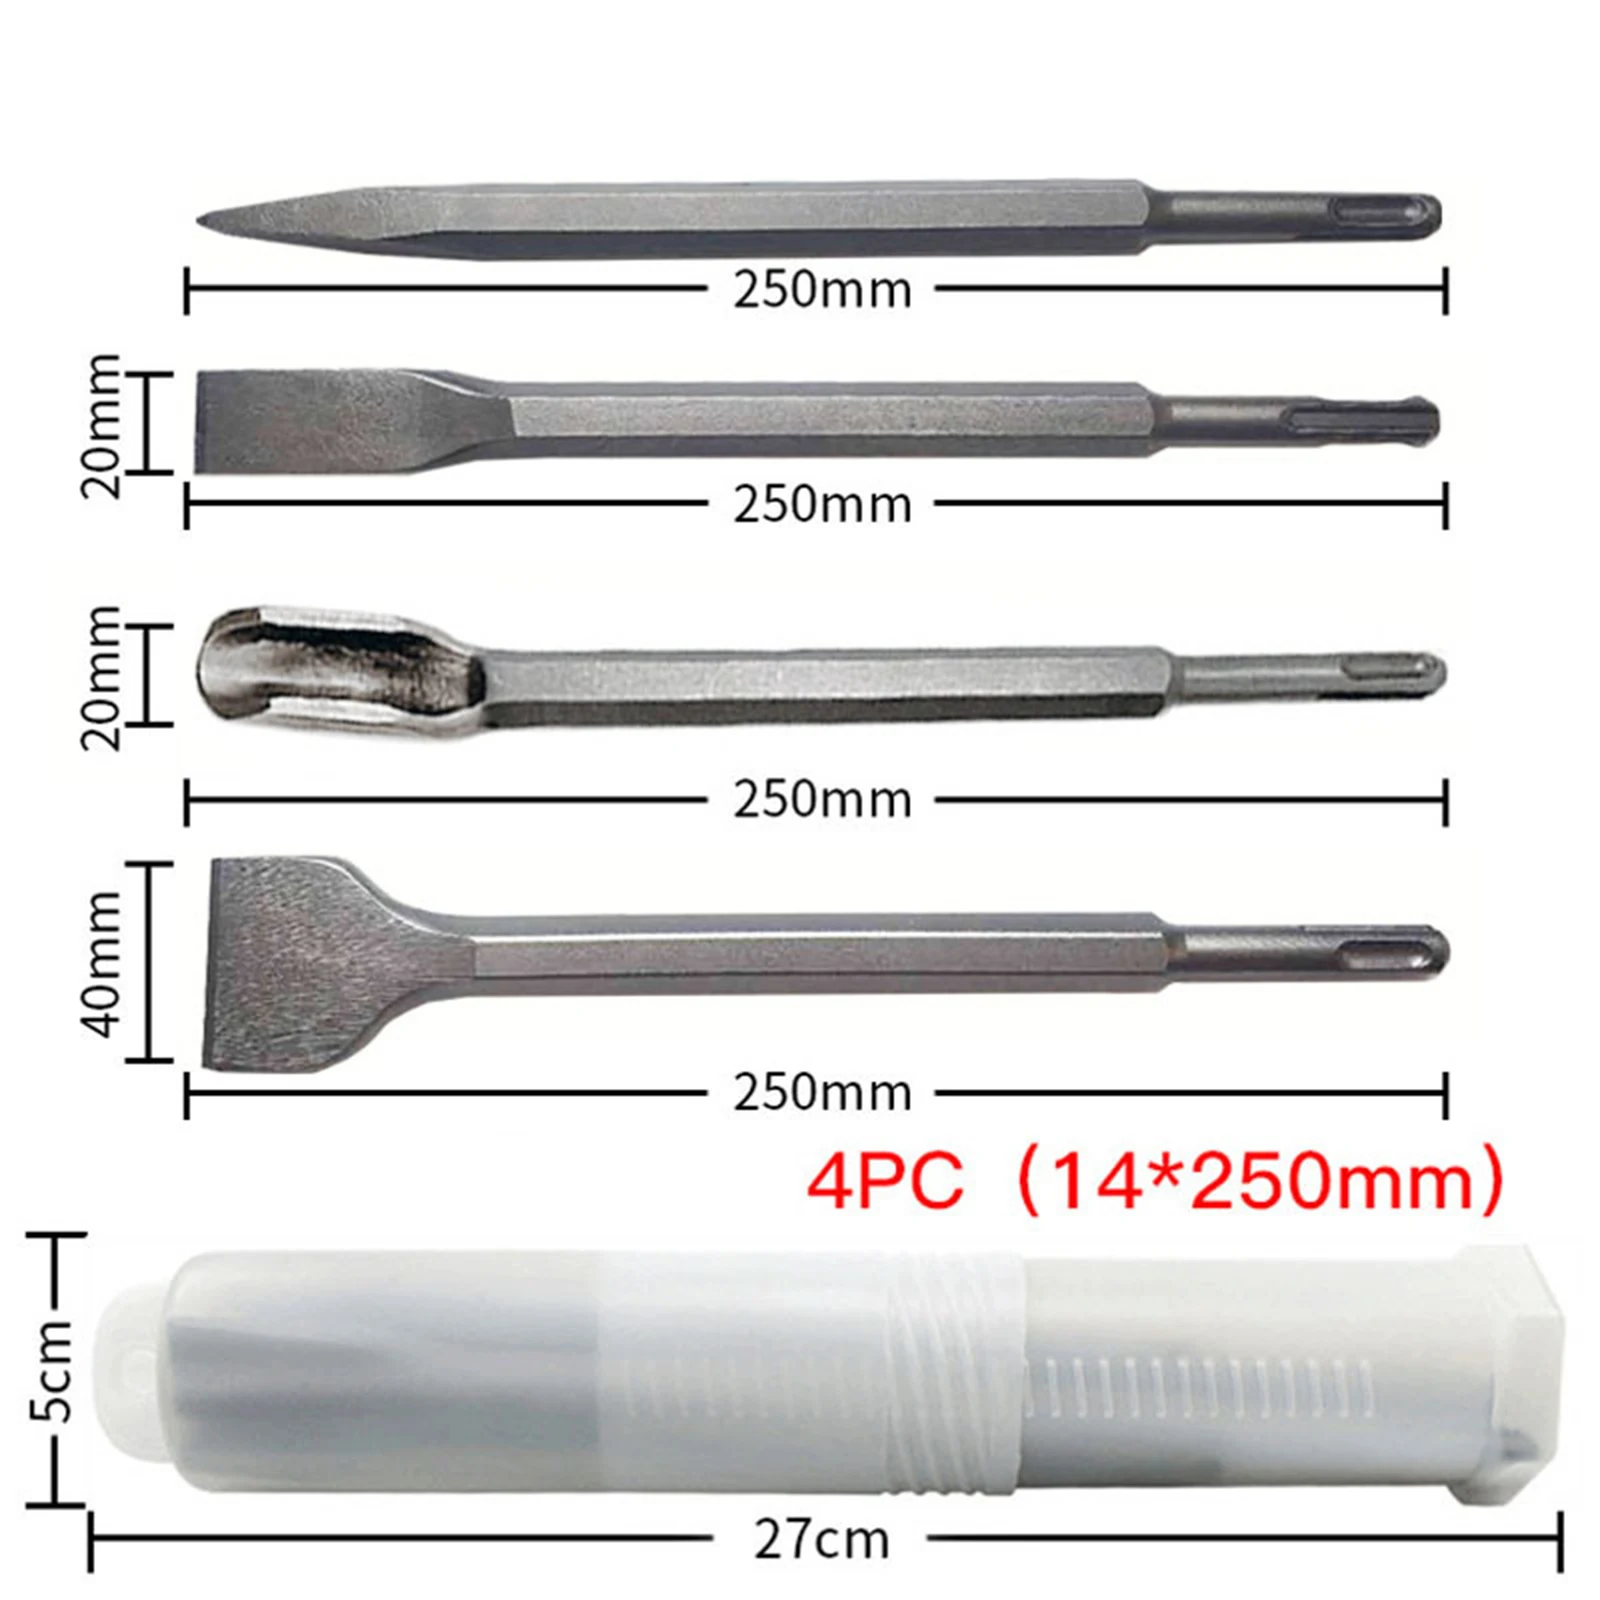 4Pcs Electric Hammer Chisel Set SDS Plus Shank Drill Bit Point Groove Flat Chisel Masonry Tools For Concrete Brick Wall Rock 32 83mm diamond core drill bit concrete perforator masonry wall drilling tools brocas m22 thread interface dropshipping